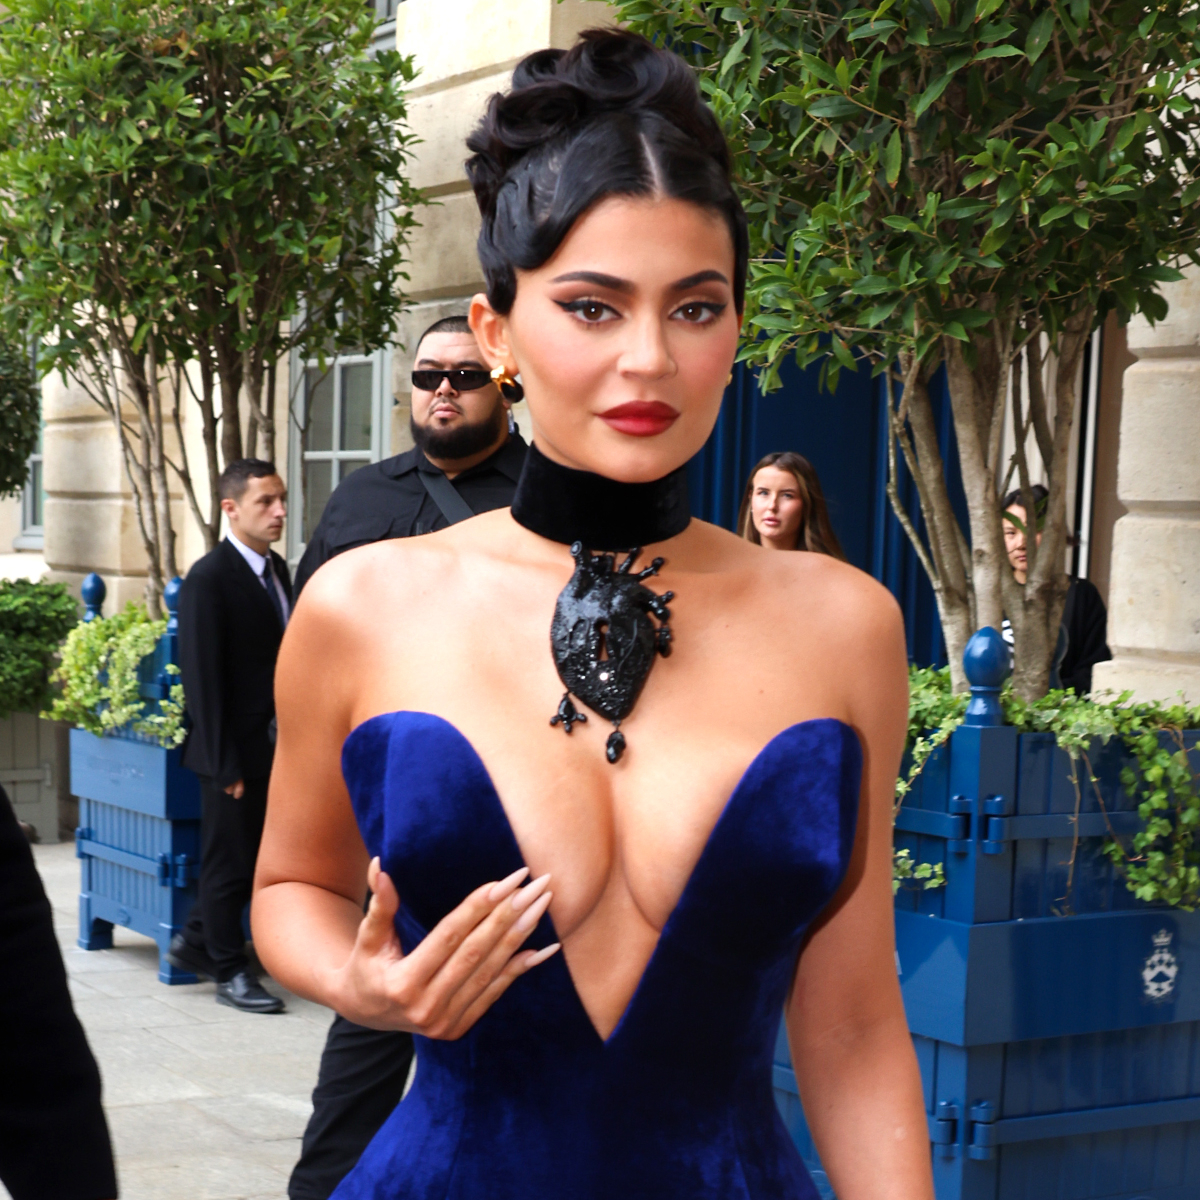 The Kylie Jenner Guide To Paris: Where The Beauty Mogul Visited In